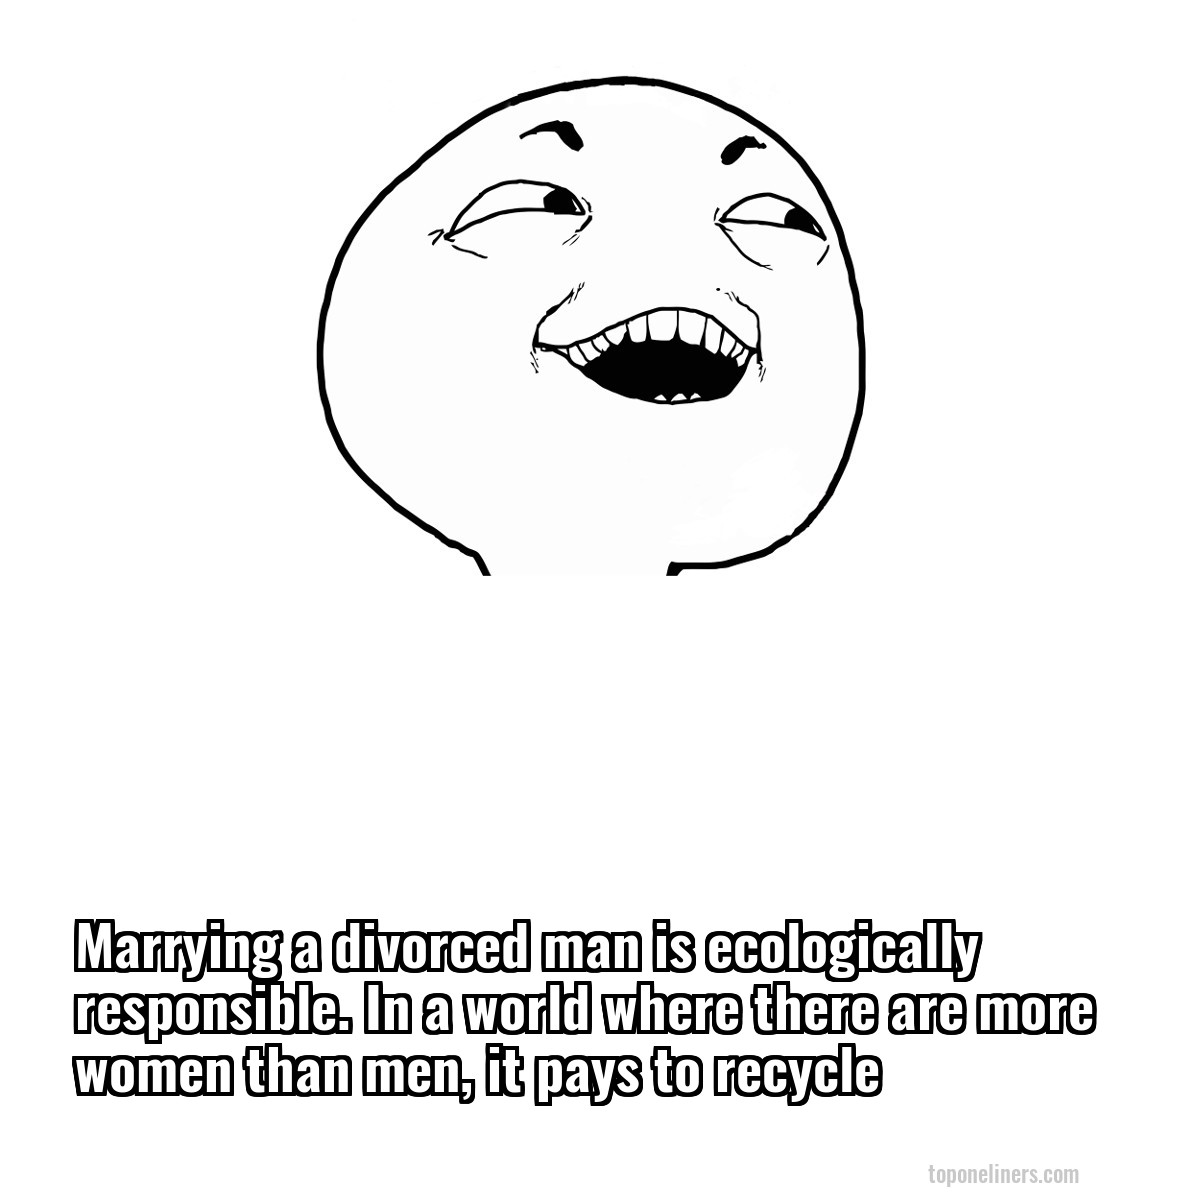 Marrying a divorced man is ecologically responsible. In a world where there are more women than men, it pays to recycle
